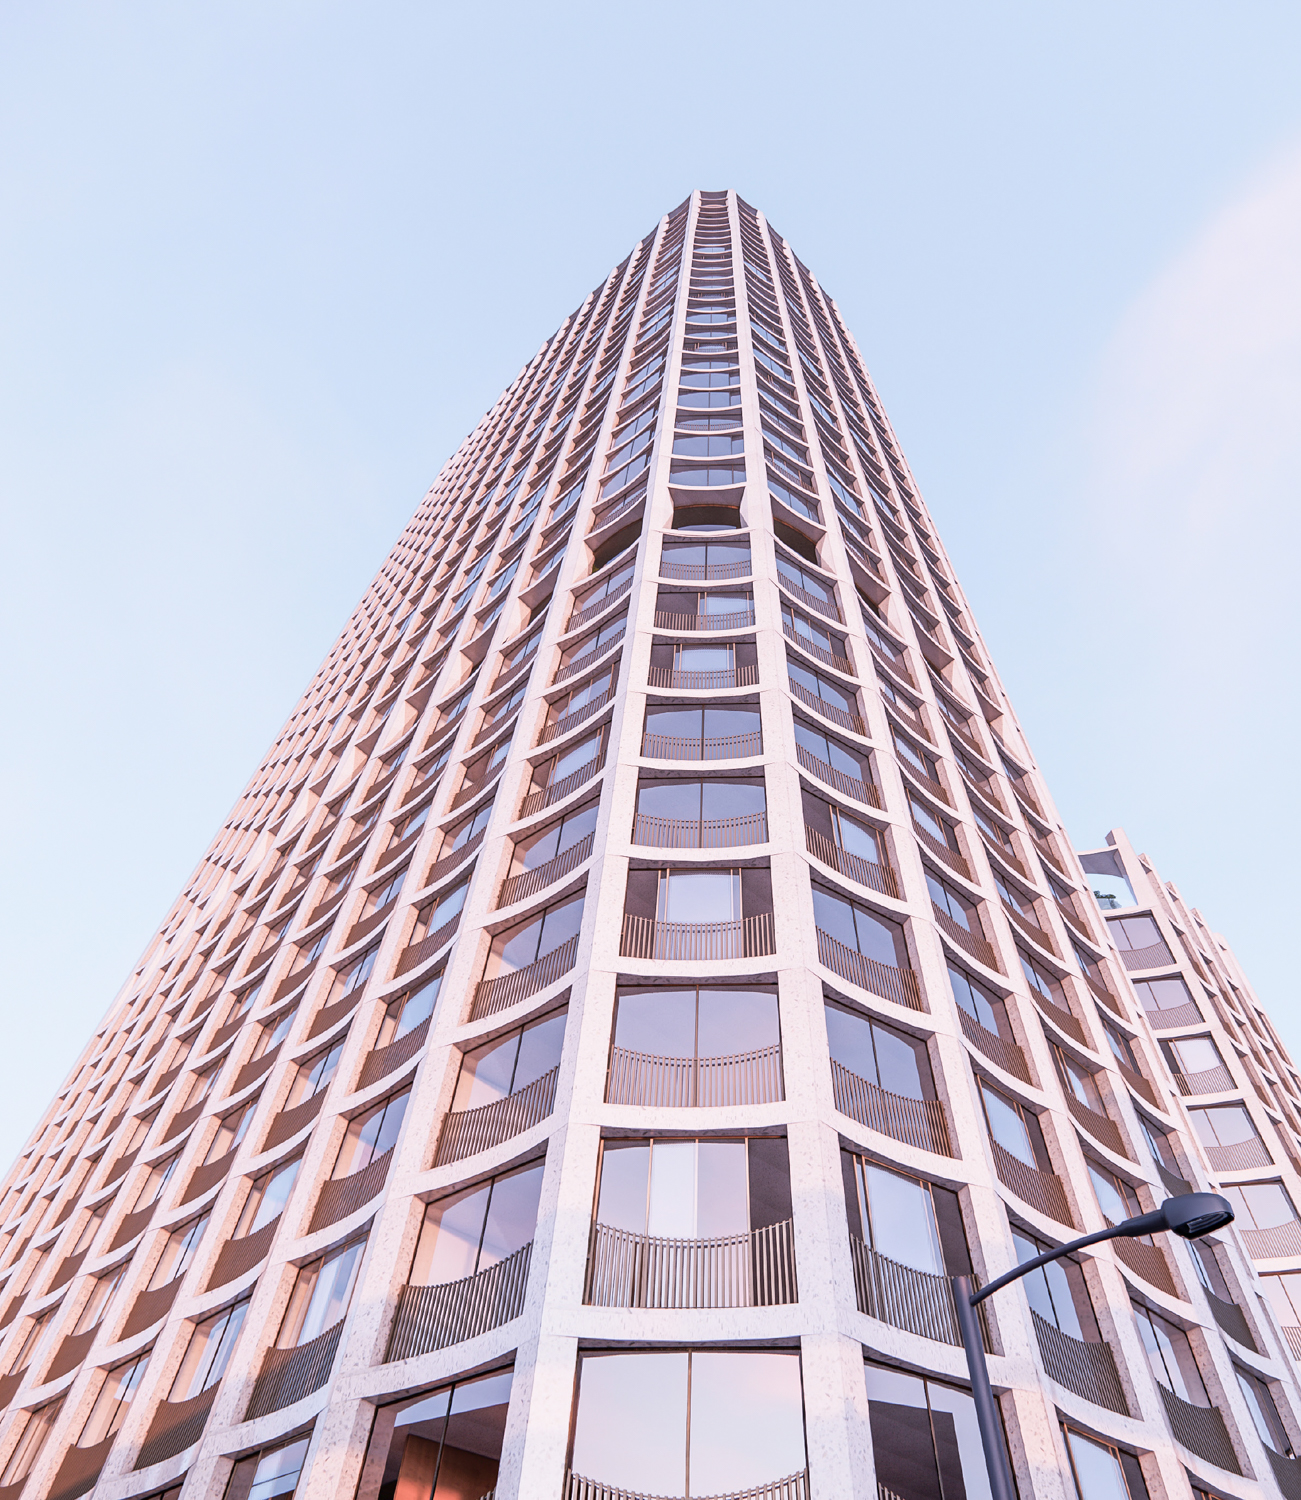 Looking up at 395 3rd Street from the sidewalk, rendering by Henning Larsen